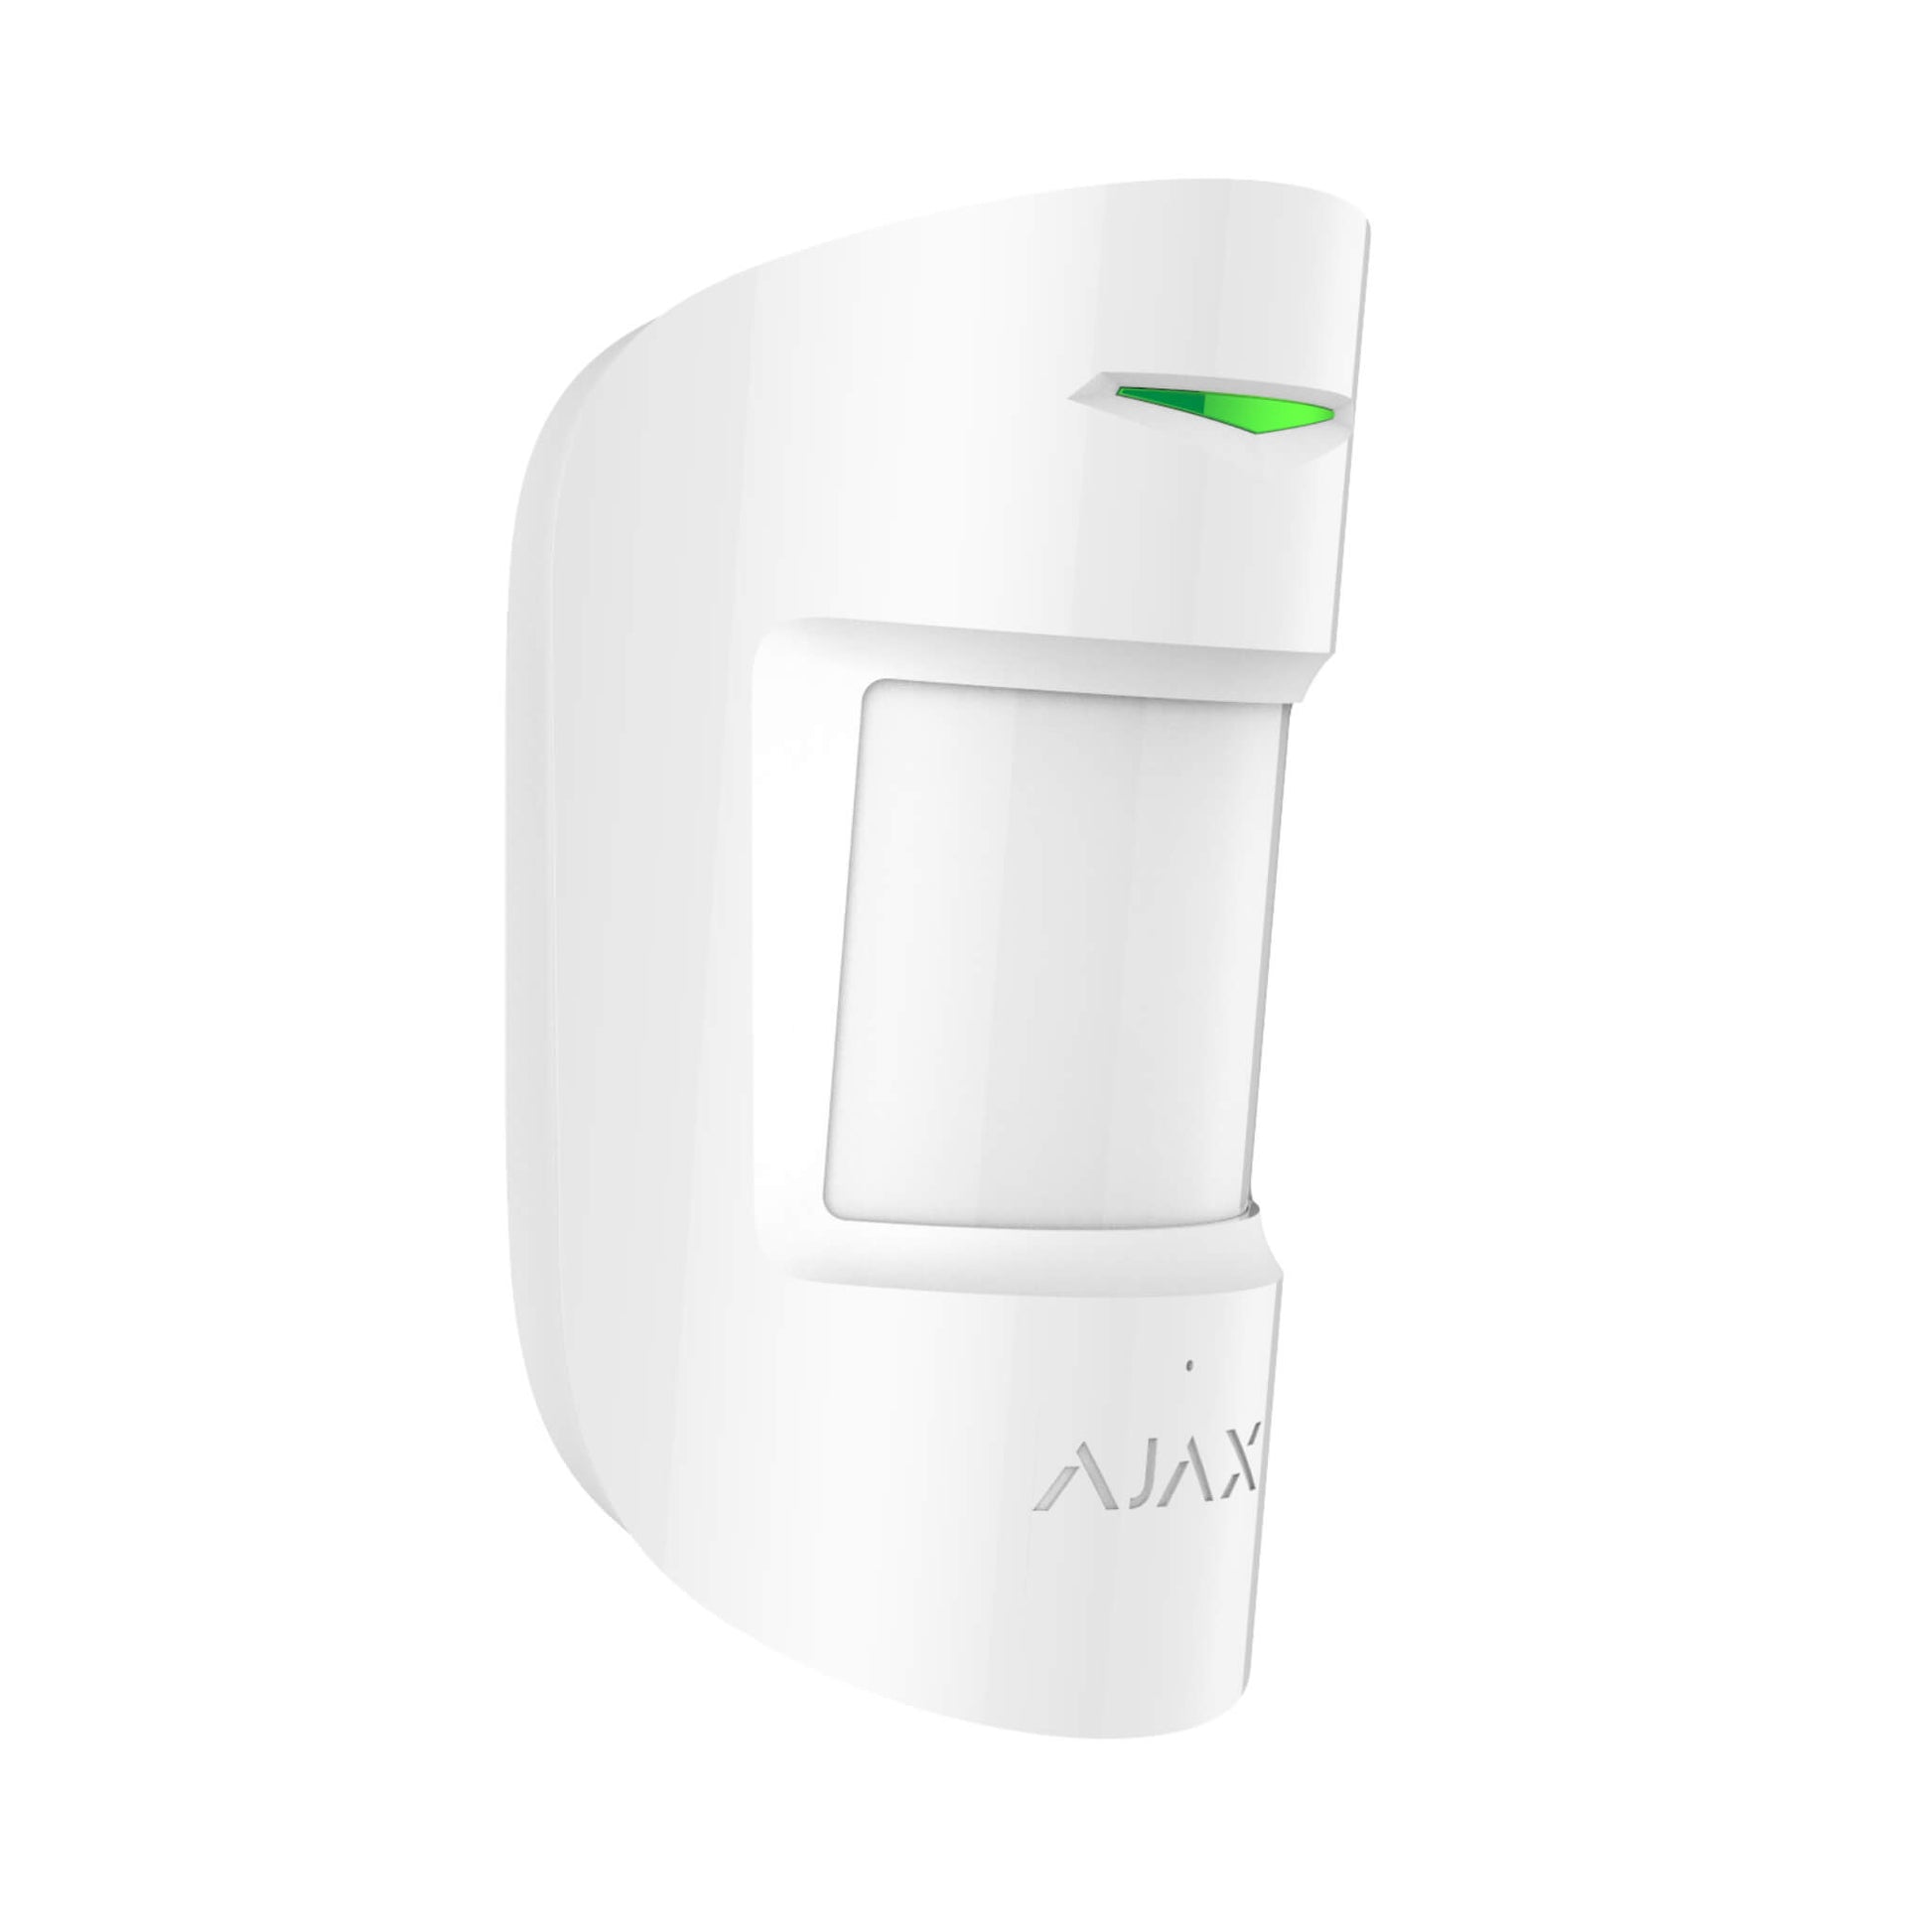 White Ajax CombiProtect Motion and vibration sensor for indoor or outdoor installations for home and business security, 110 × 65 × 50 mm in size, 92 grams in size. Turned left view of device 